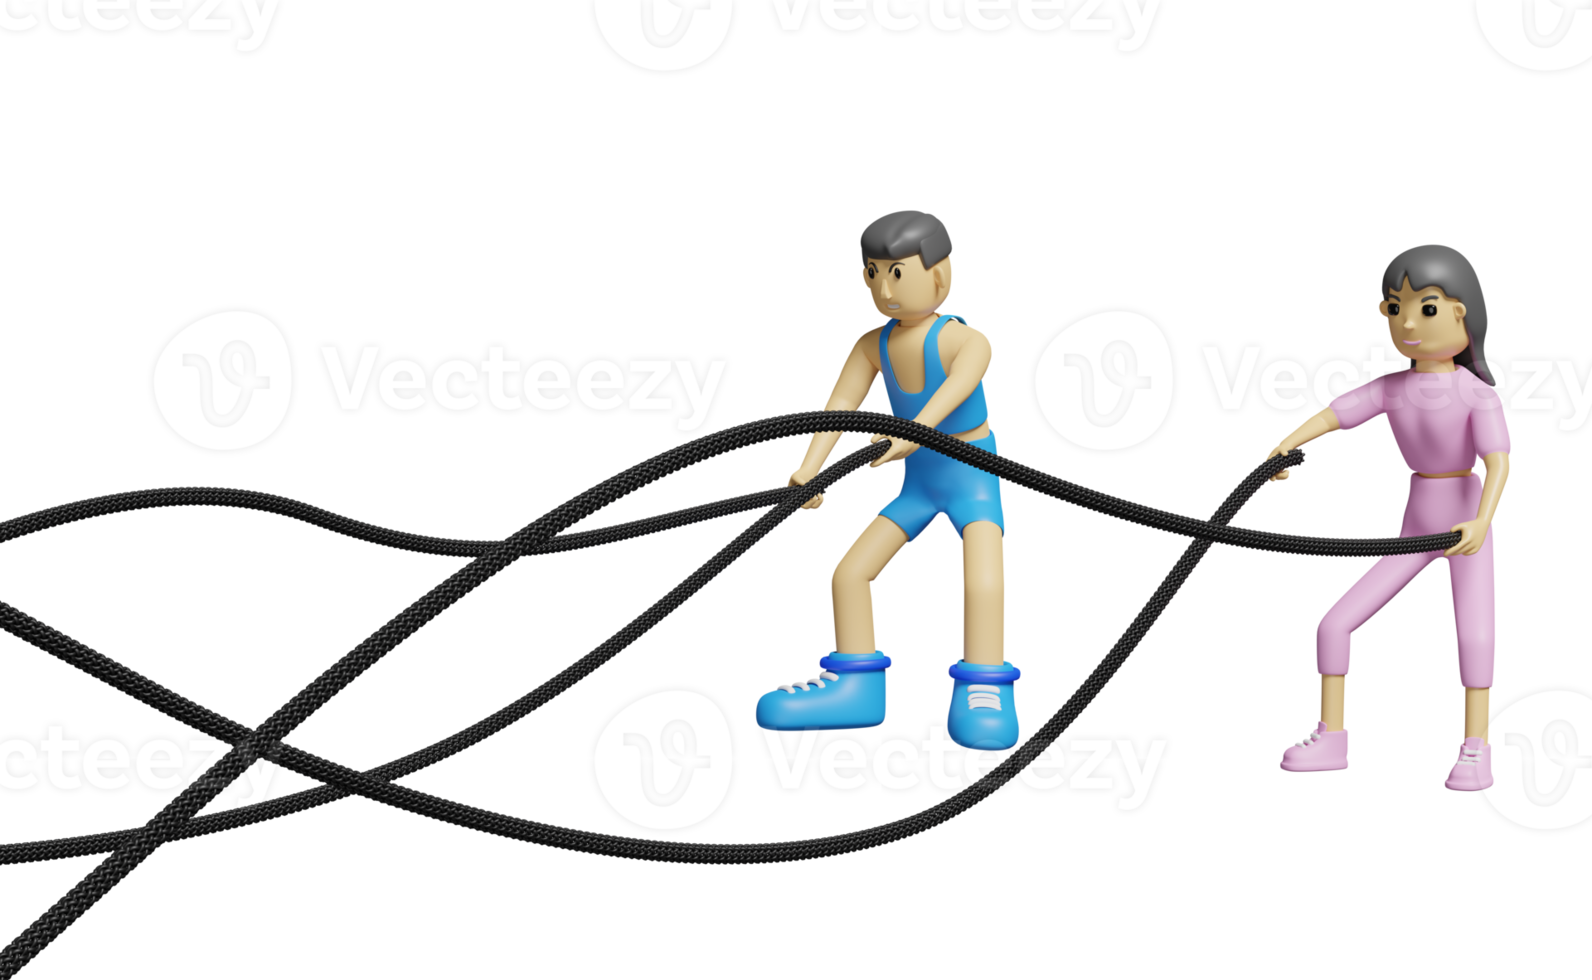 cartoon character fitness people with battle ropes exercise in gym. exercise for health Concept, 3d illustration or 3d render png